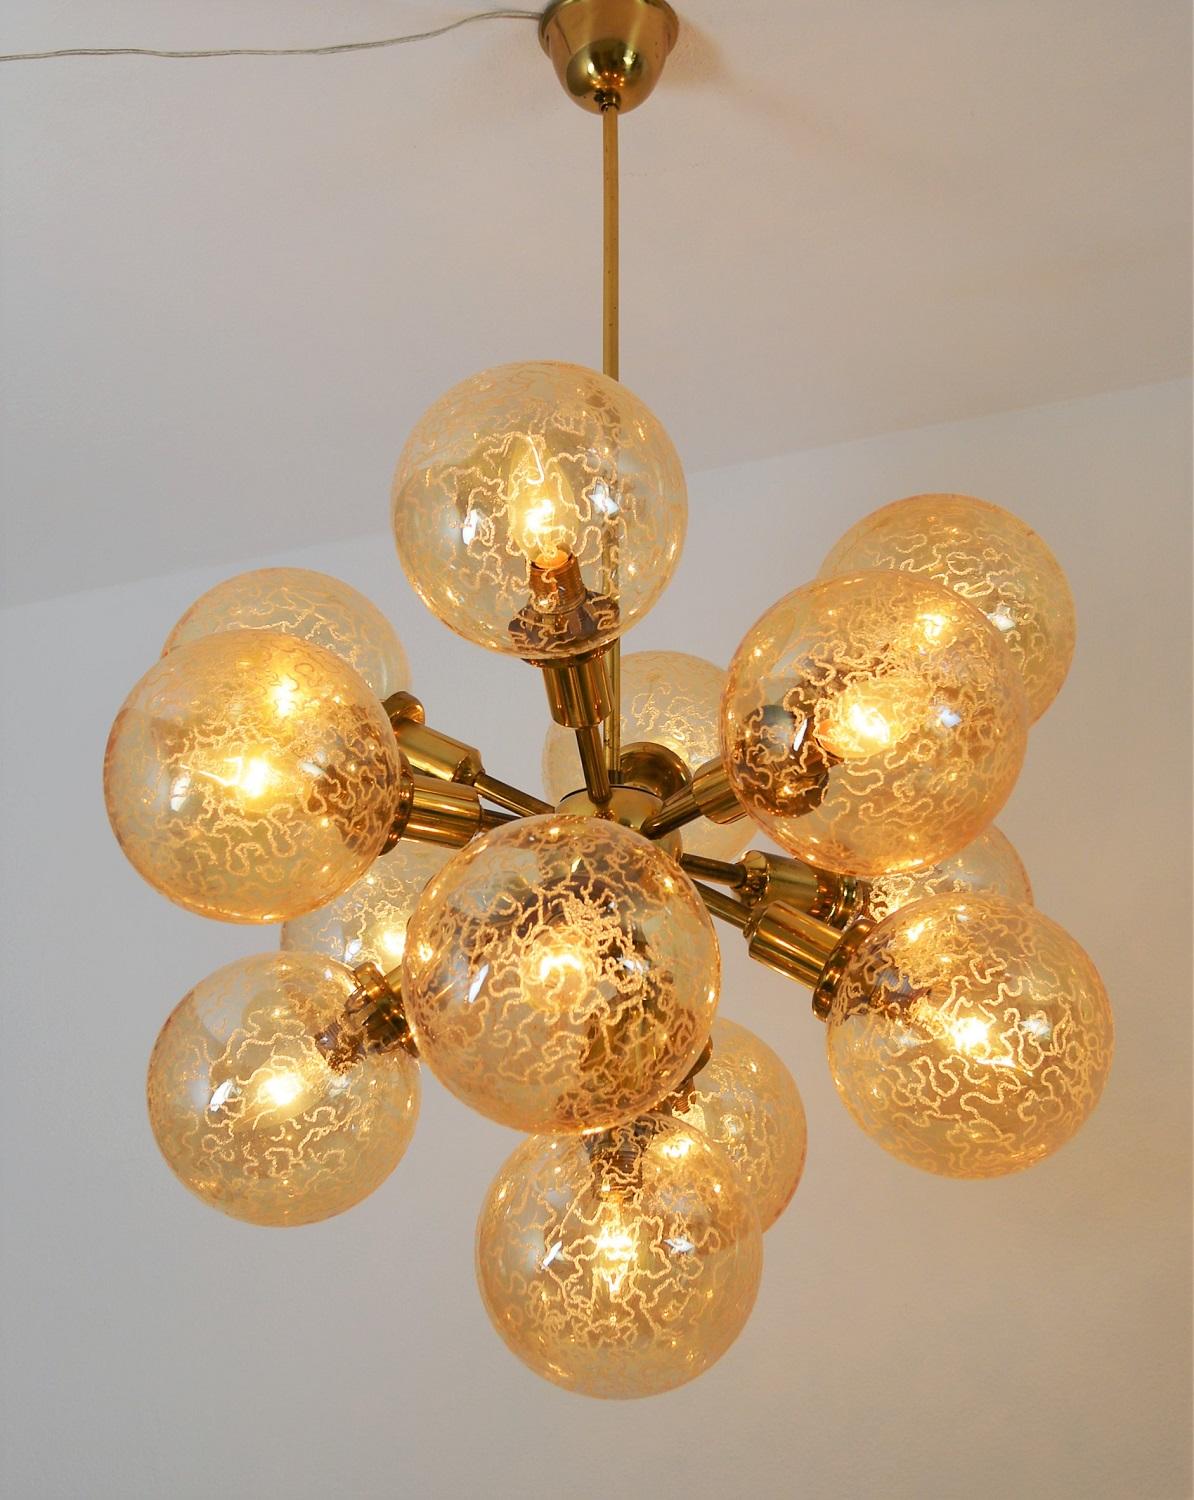 Magnificent pair of Sputnik chandeliers with shiny brass frame and gorgeous glass 13 glass spheres.
Made in Austria during the 1960s.
The glasses are in amber or honey color with bizzarre pattern. The diameter of one glass sphere is 5.9 in or 15